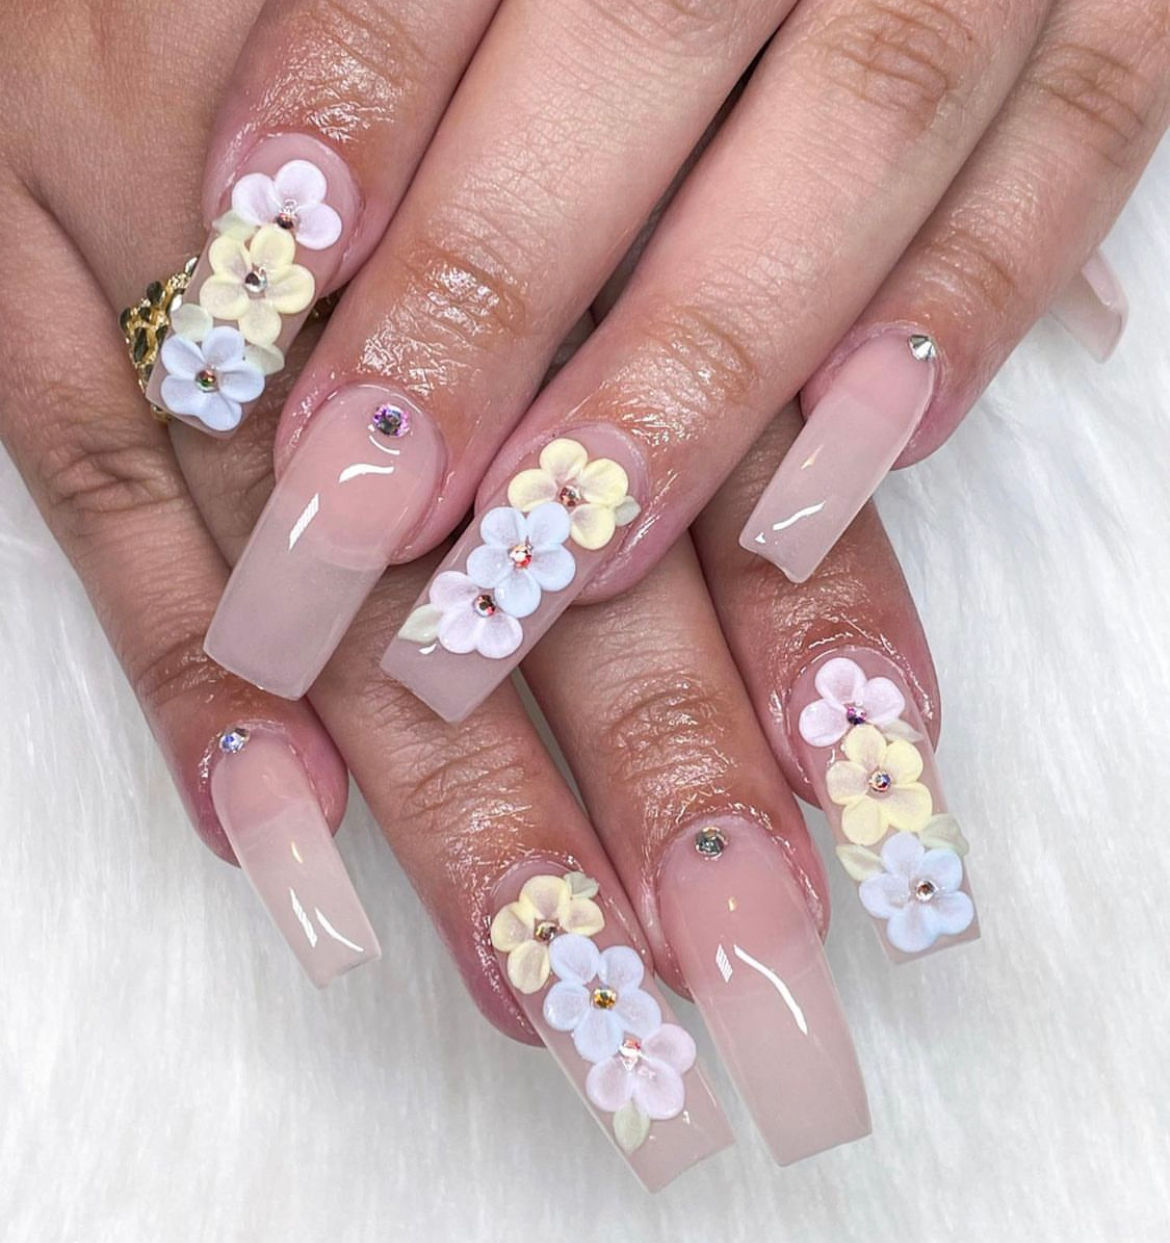 Top 3D nail styles to incorporate into your elaborate manicure routine